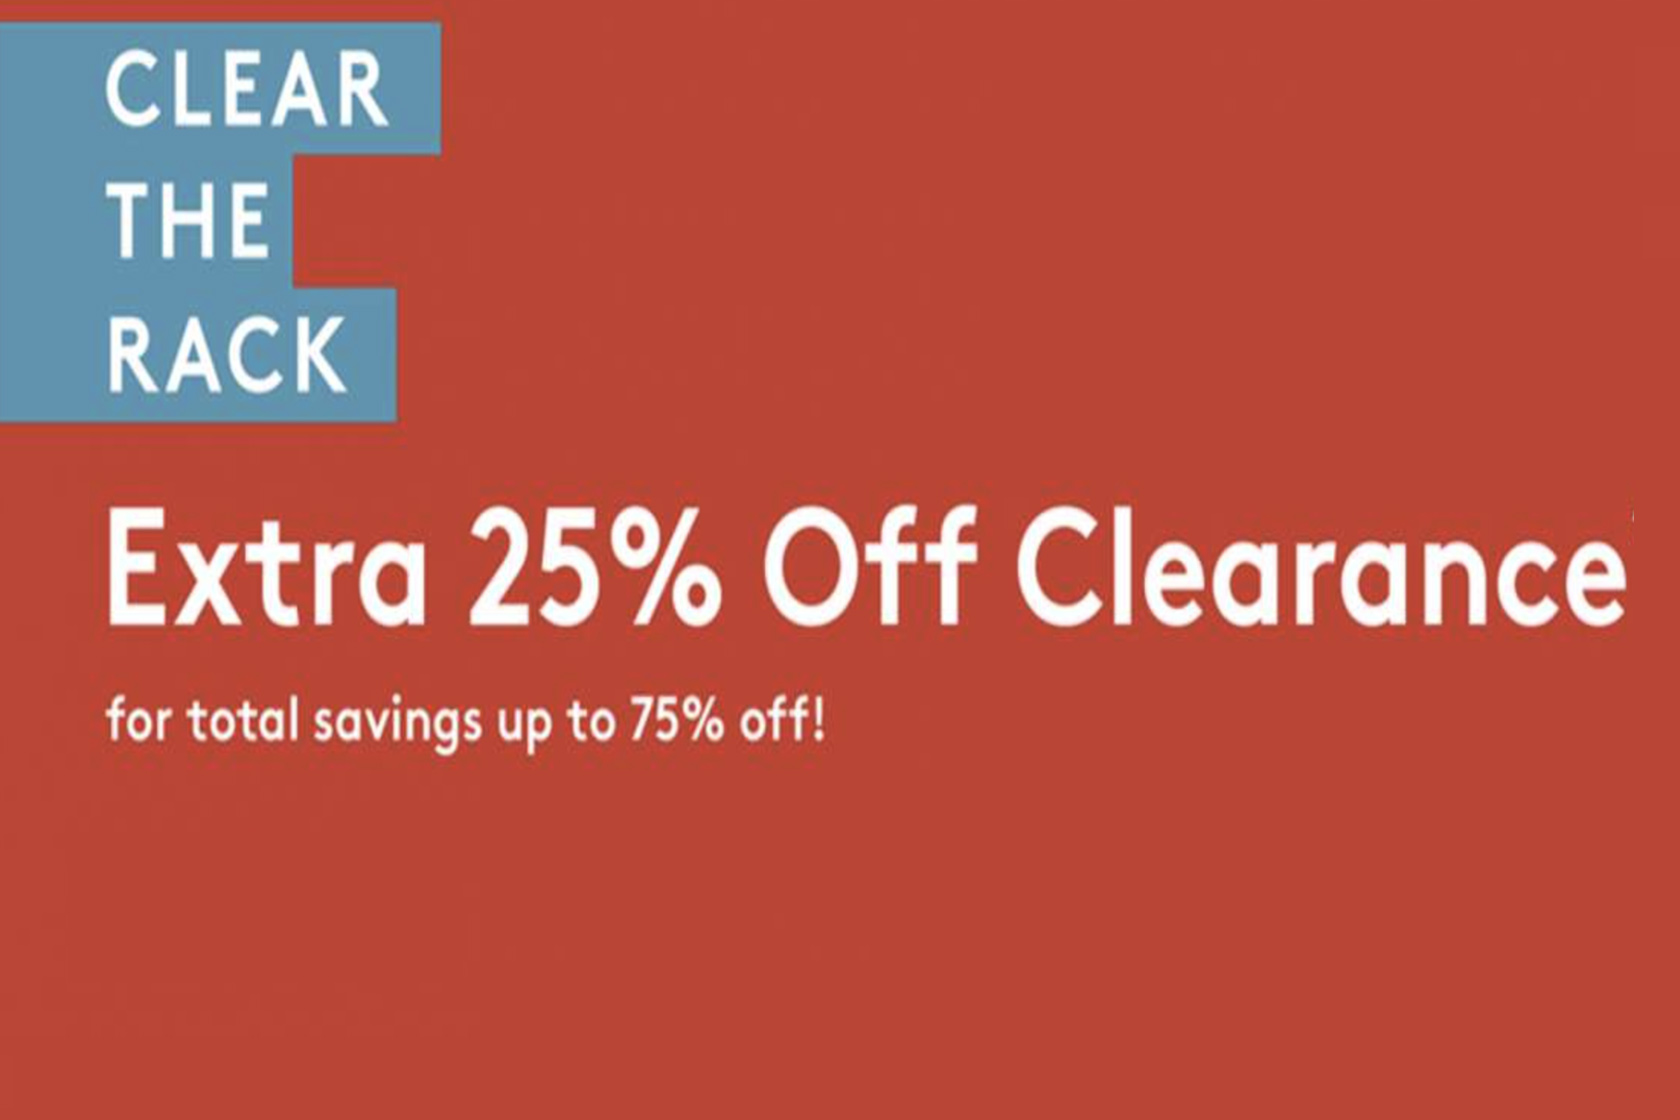 Nordstrom Rack takes 25 percent off clearance for Labor Day sale